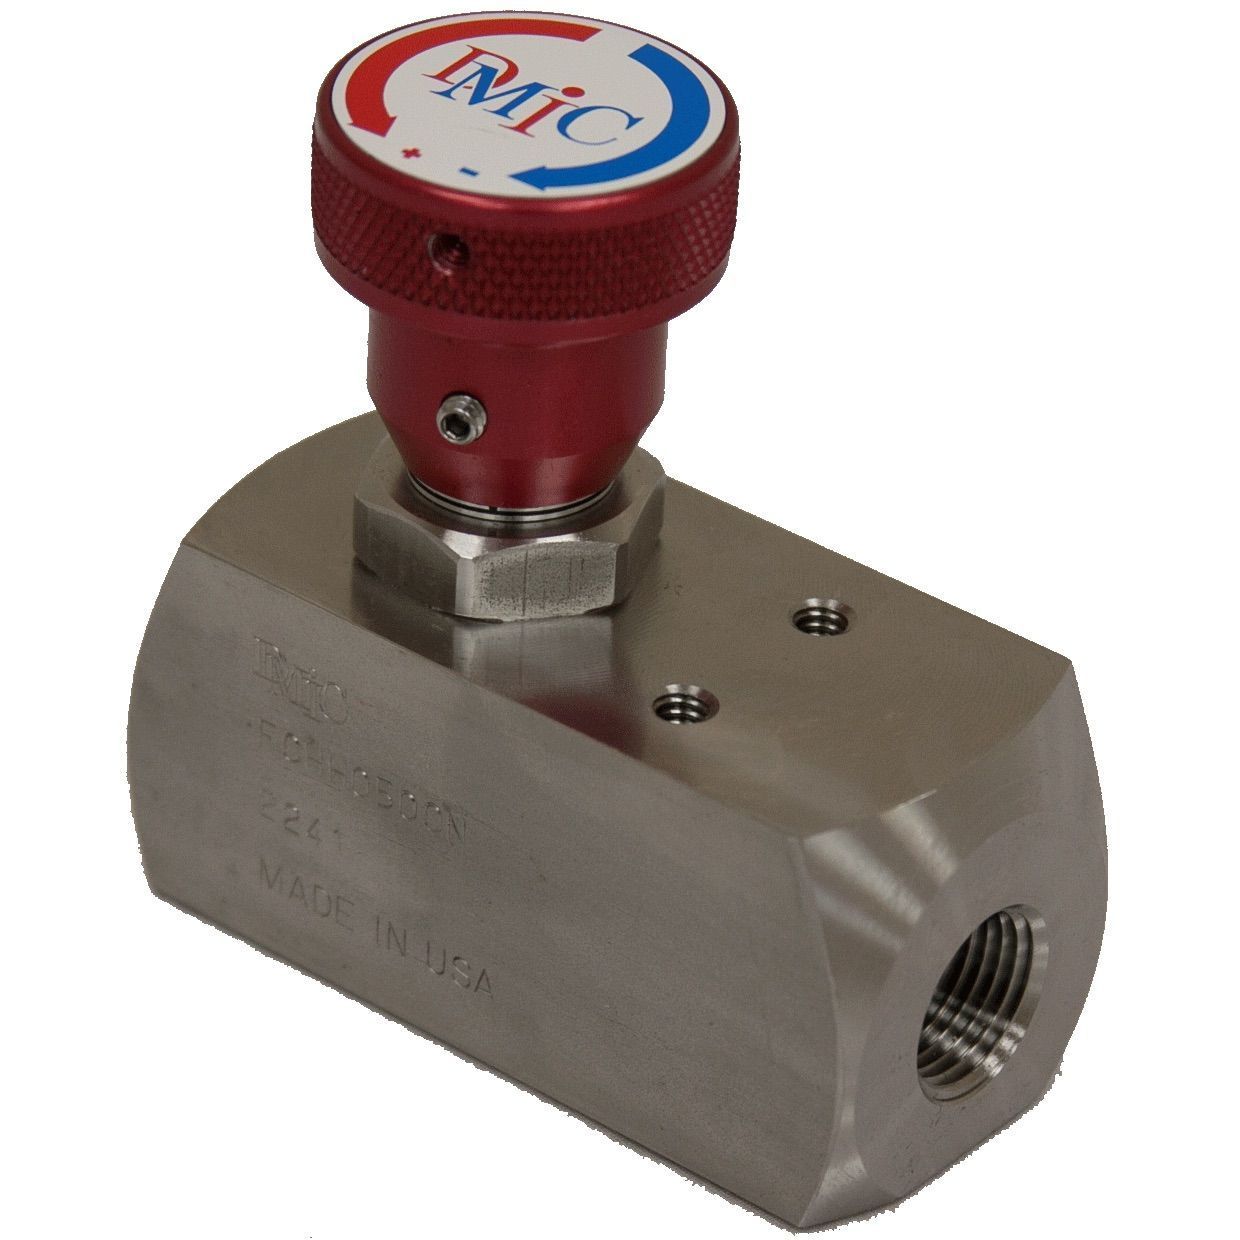 FCHH-1500S-2221 : DMIC Flow Control, Unidirectional, with Integrated Check, #24 SAE (1.5"), 316SS, 10000psi